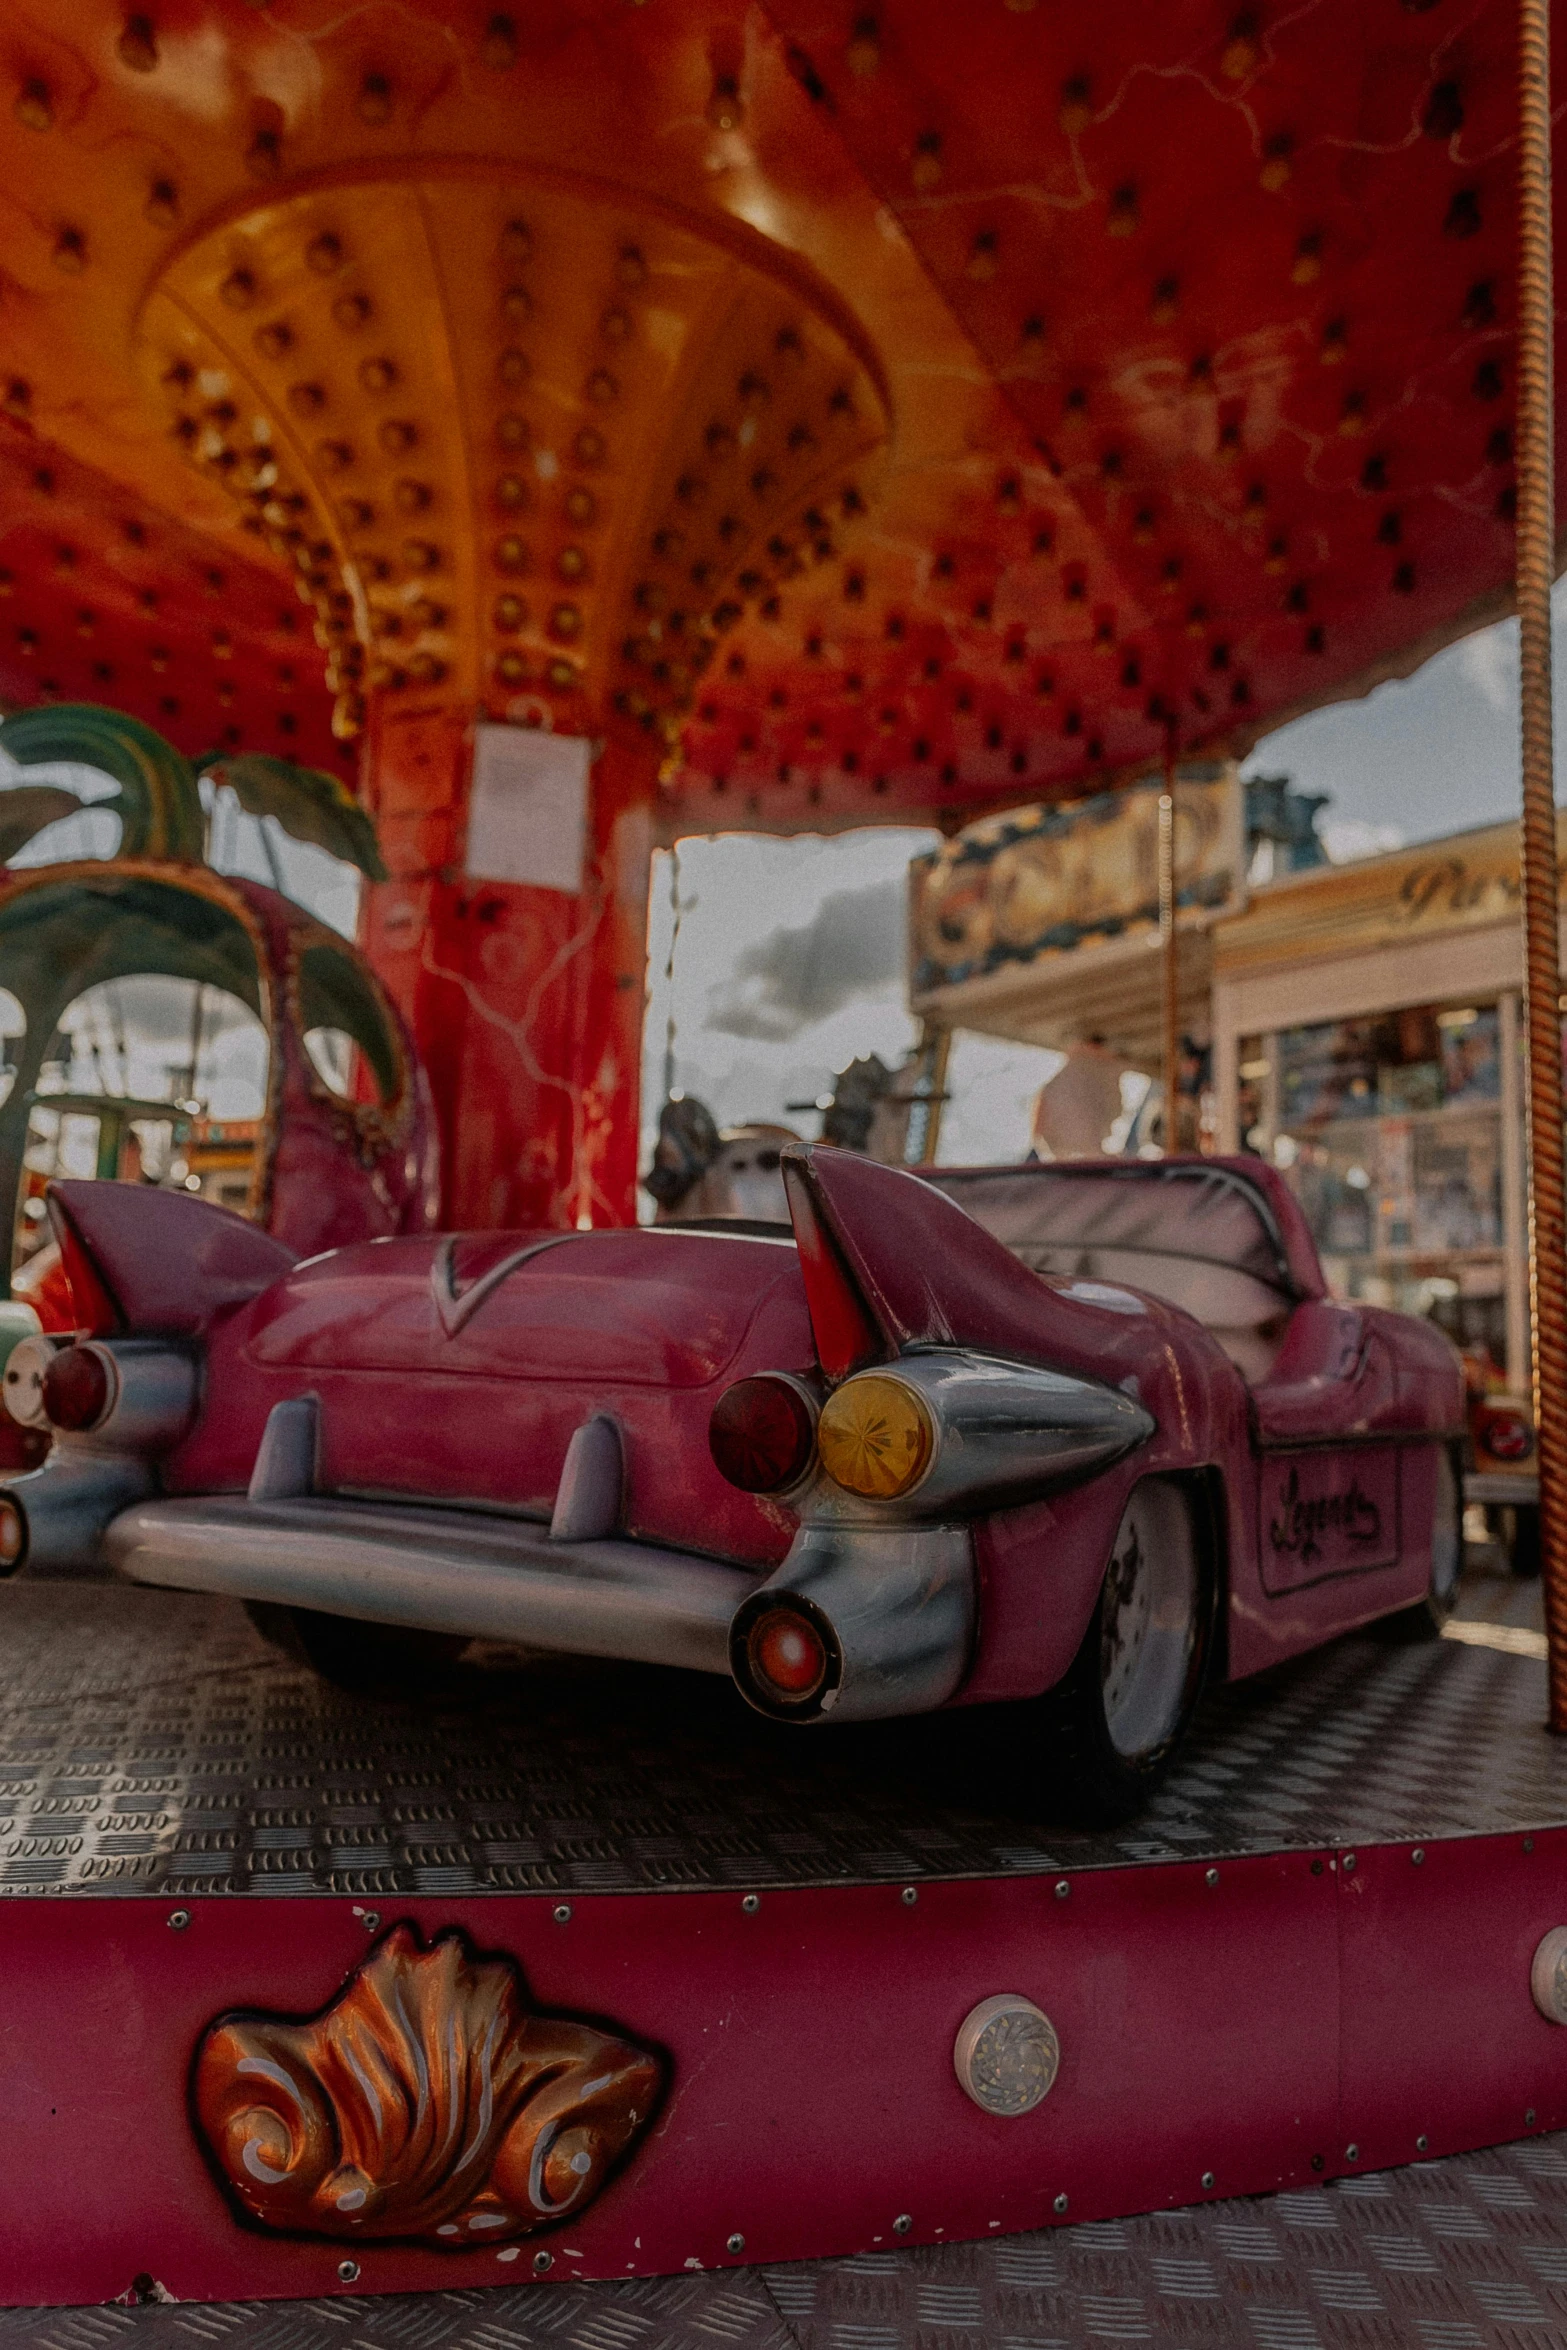 a carnival ride with classic pink car and carnival rides